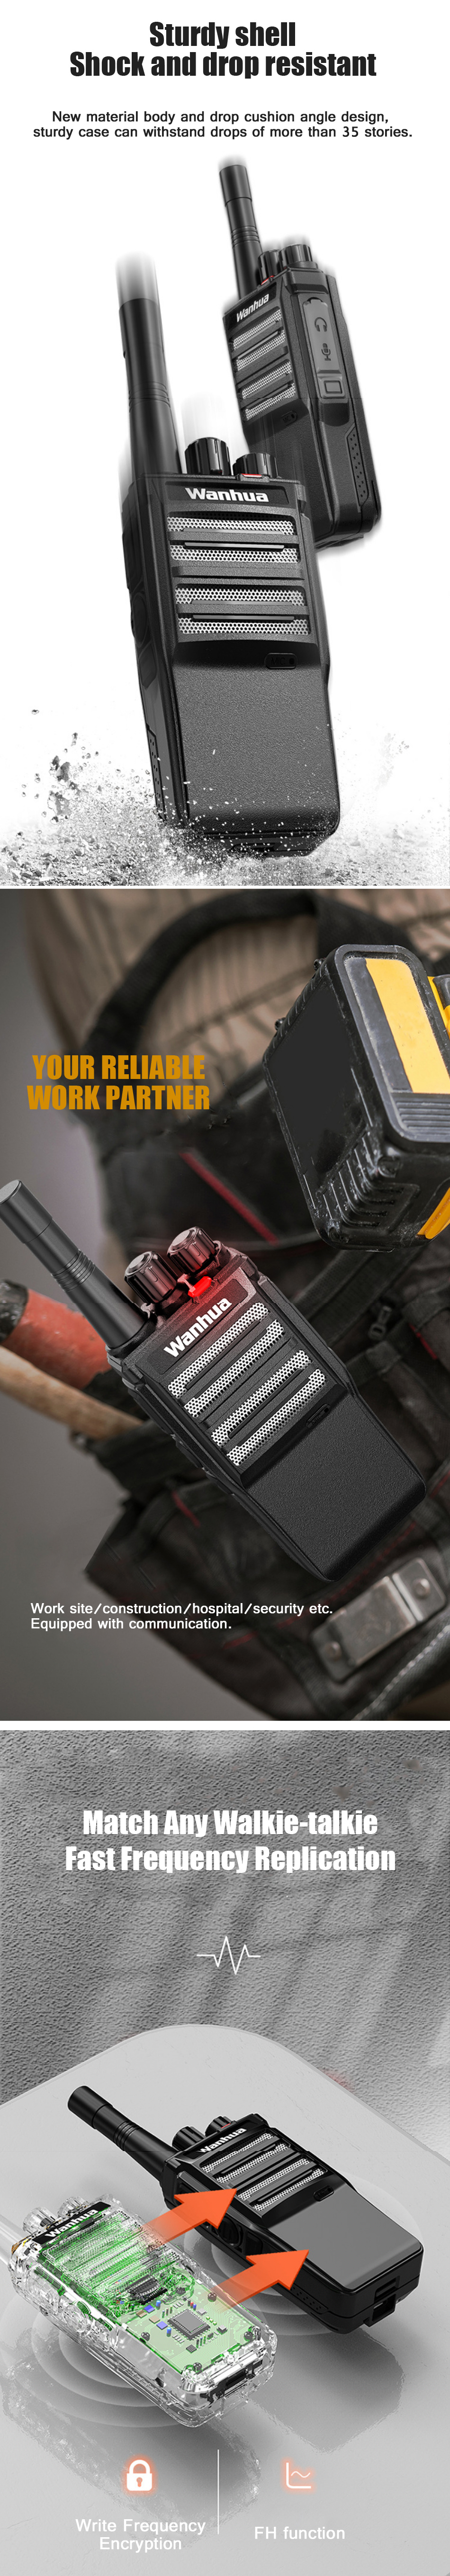 WANHUA-8W-Classic-Walkie-Talkie-16-Channels-400-470MHz-Two-Way-Handheld-Radio-Outdoor-Work-Durable-T-1771312-2